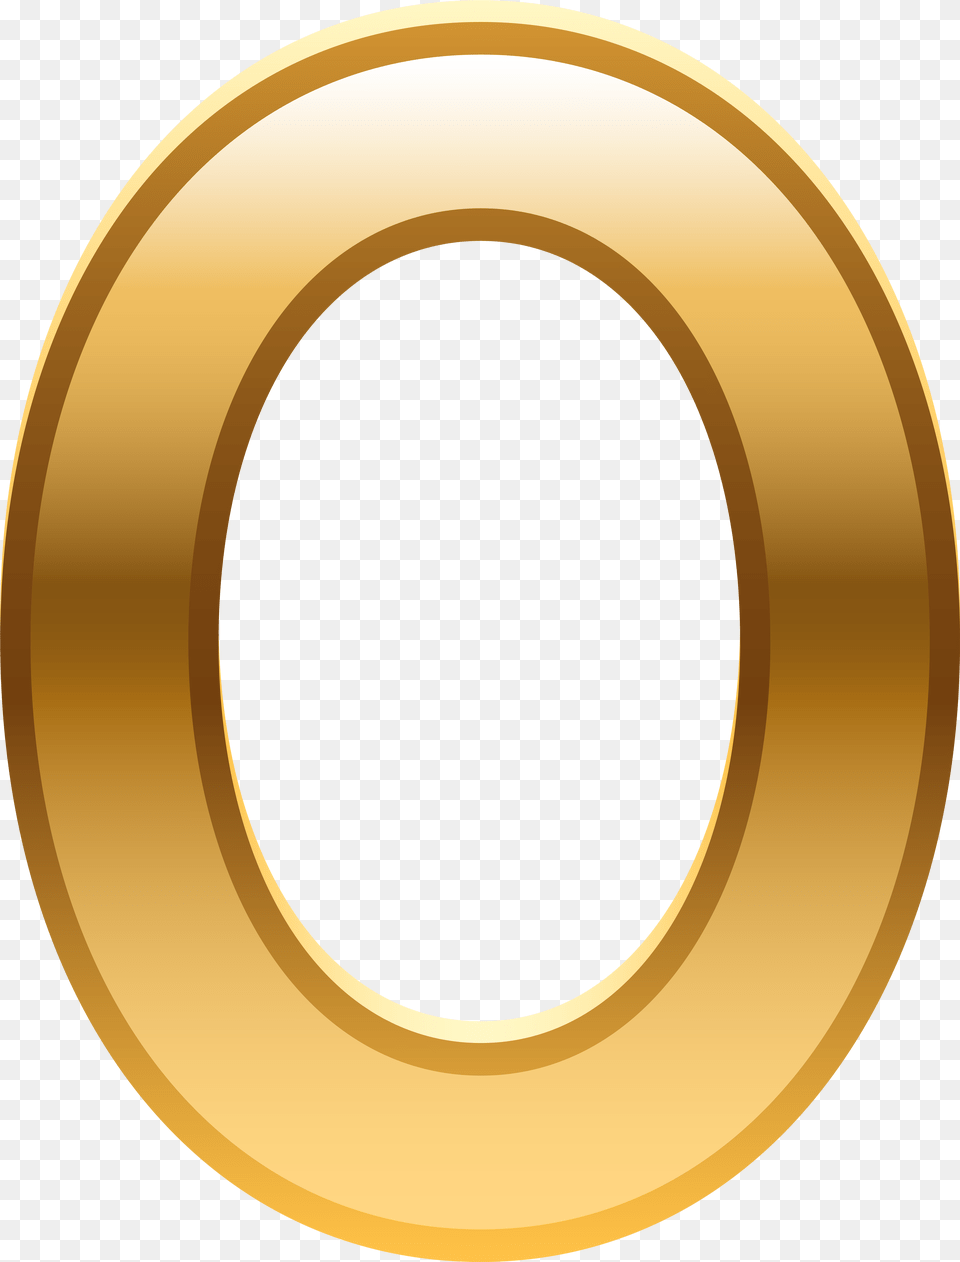 Zero Golden, Oval, Gold, Disk Png